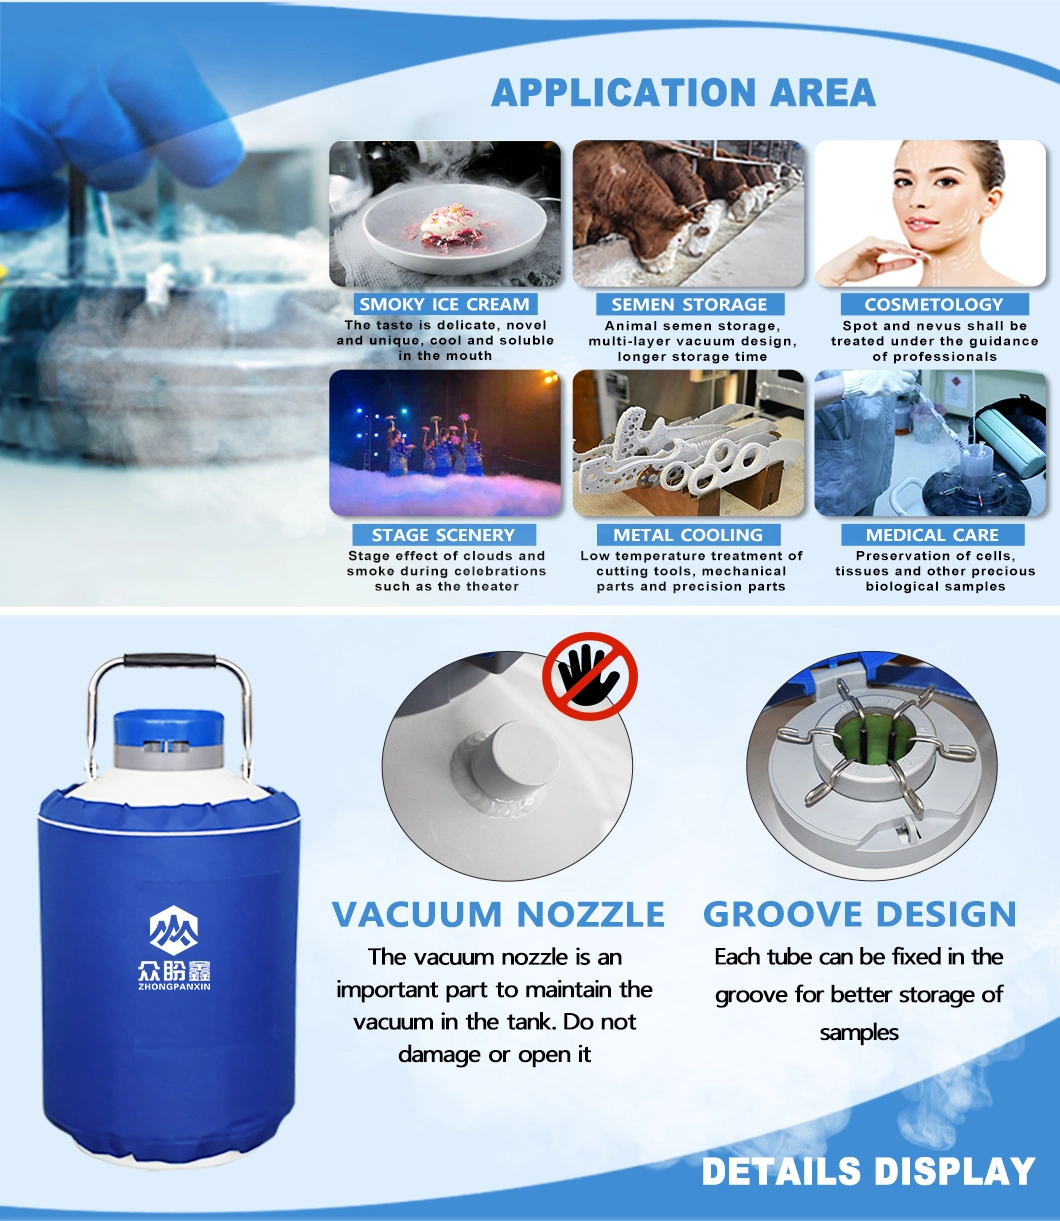 Yds-10 Yds-20 Liquid Nitrogen Tank with Canisters Tank for Cryogenic Storage Biological Materials